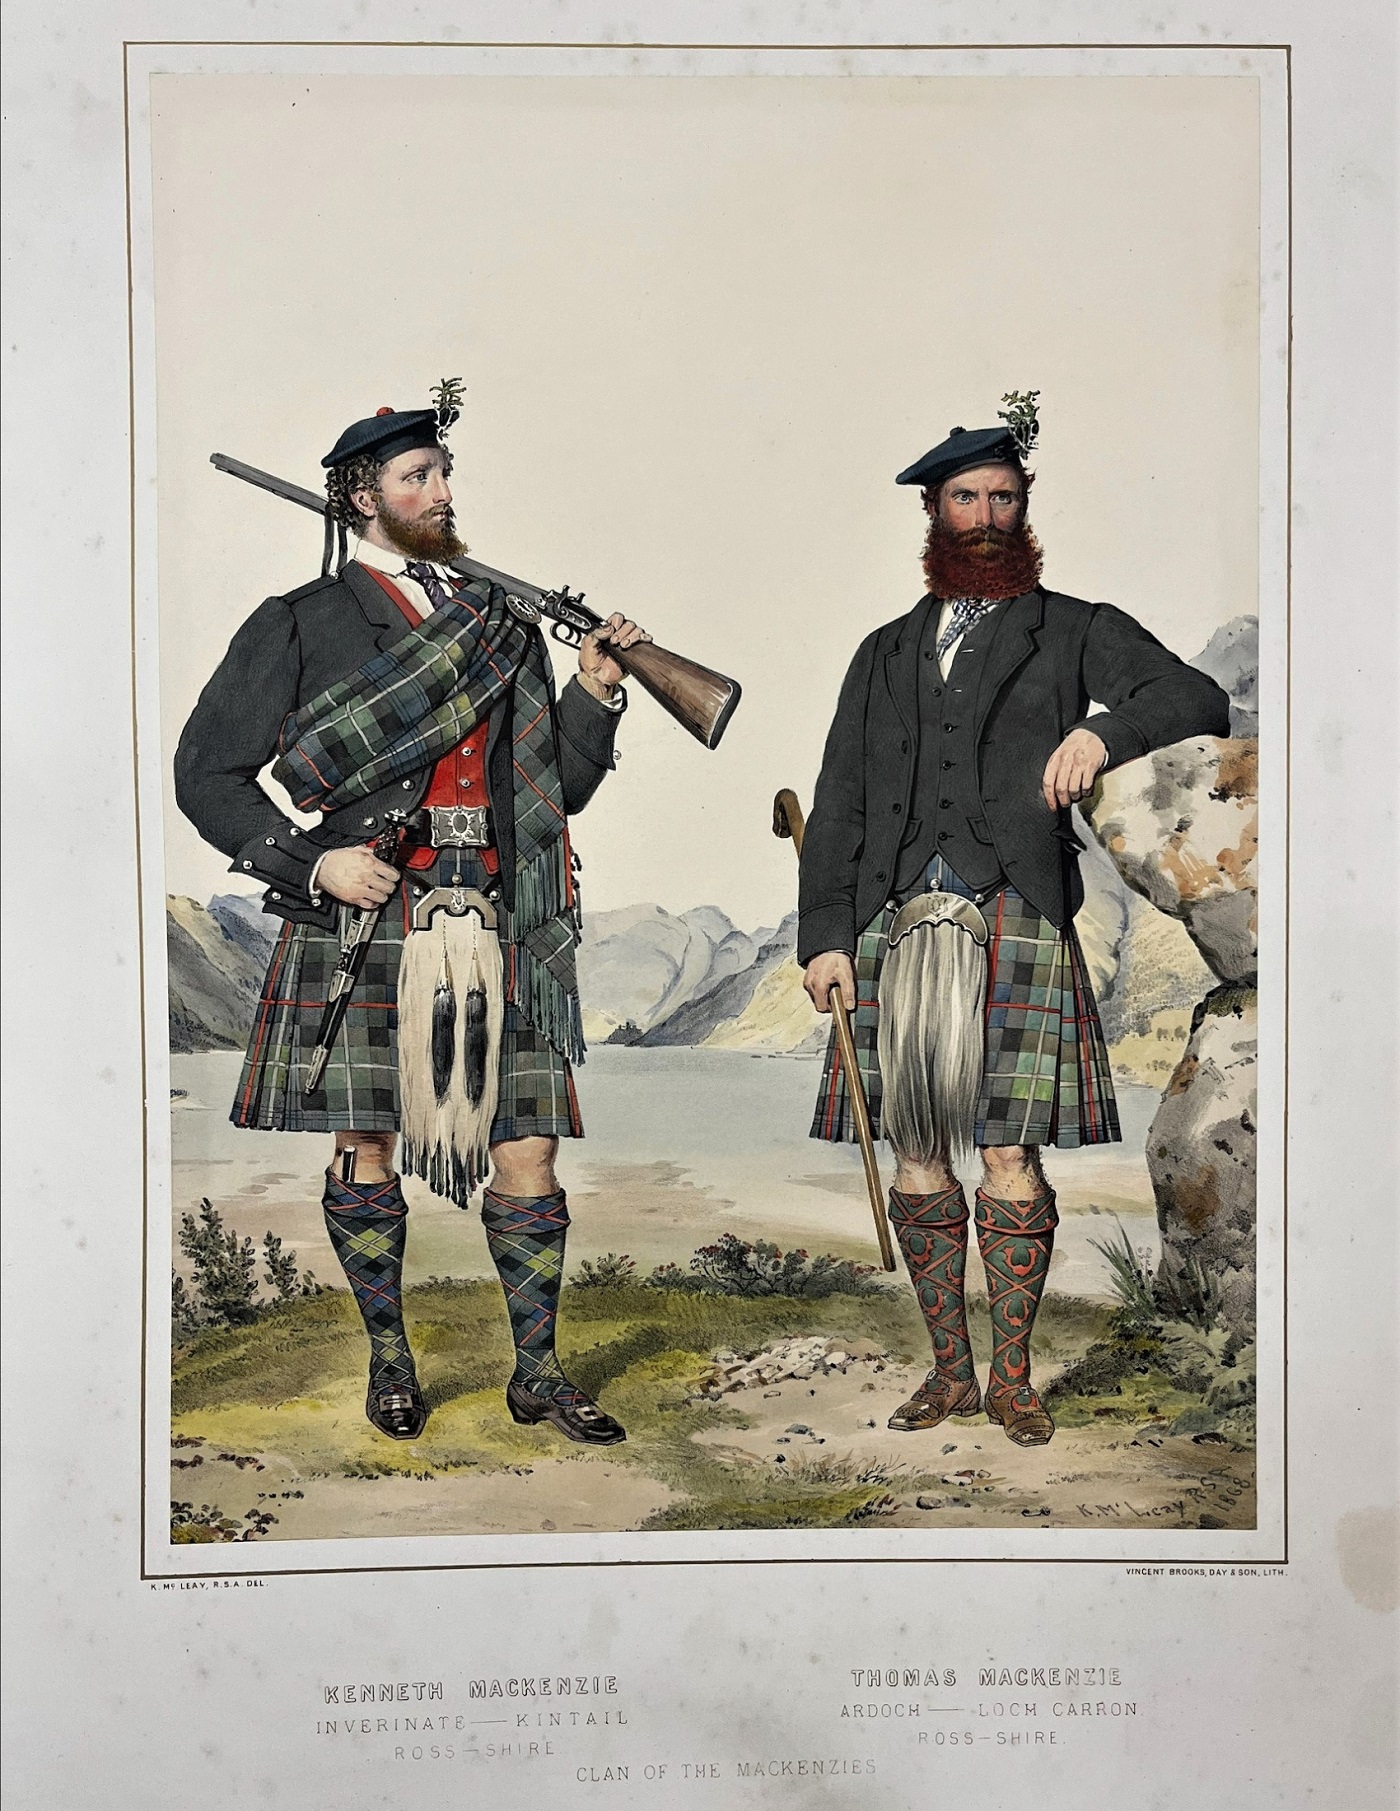 Illustration showing two wealthy men in suit jackets and short green kilts posing in front of a loch lined with hills.